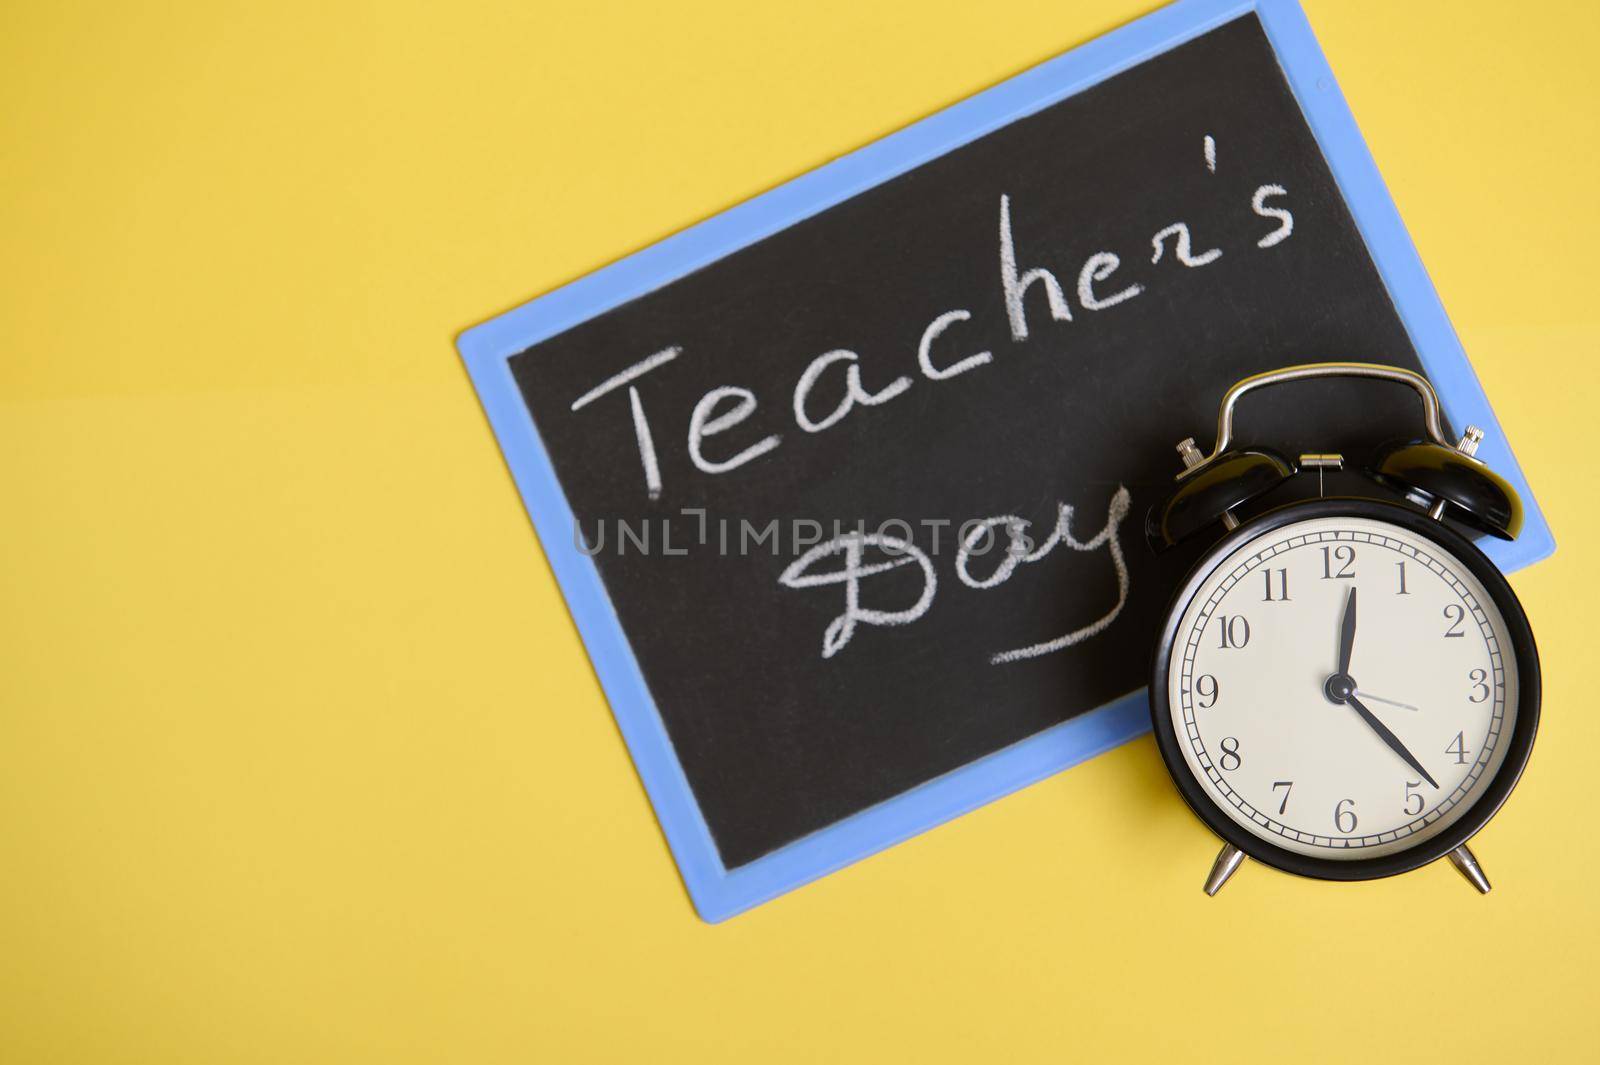 Flat lay composition from an alarm clock and chalkboard on yellow background with copy space for text. Teacher's Day